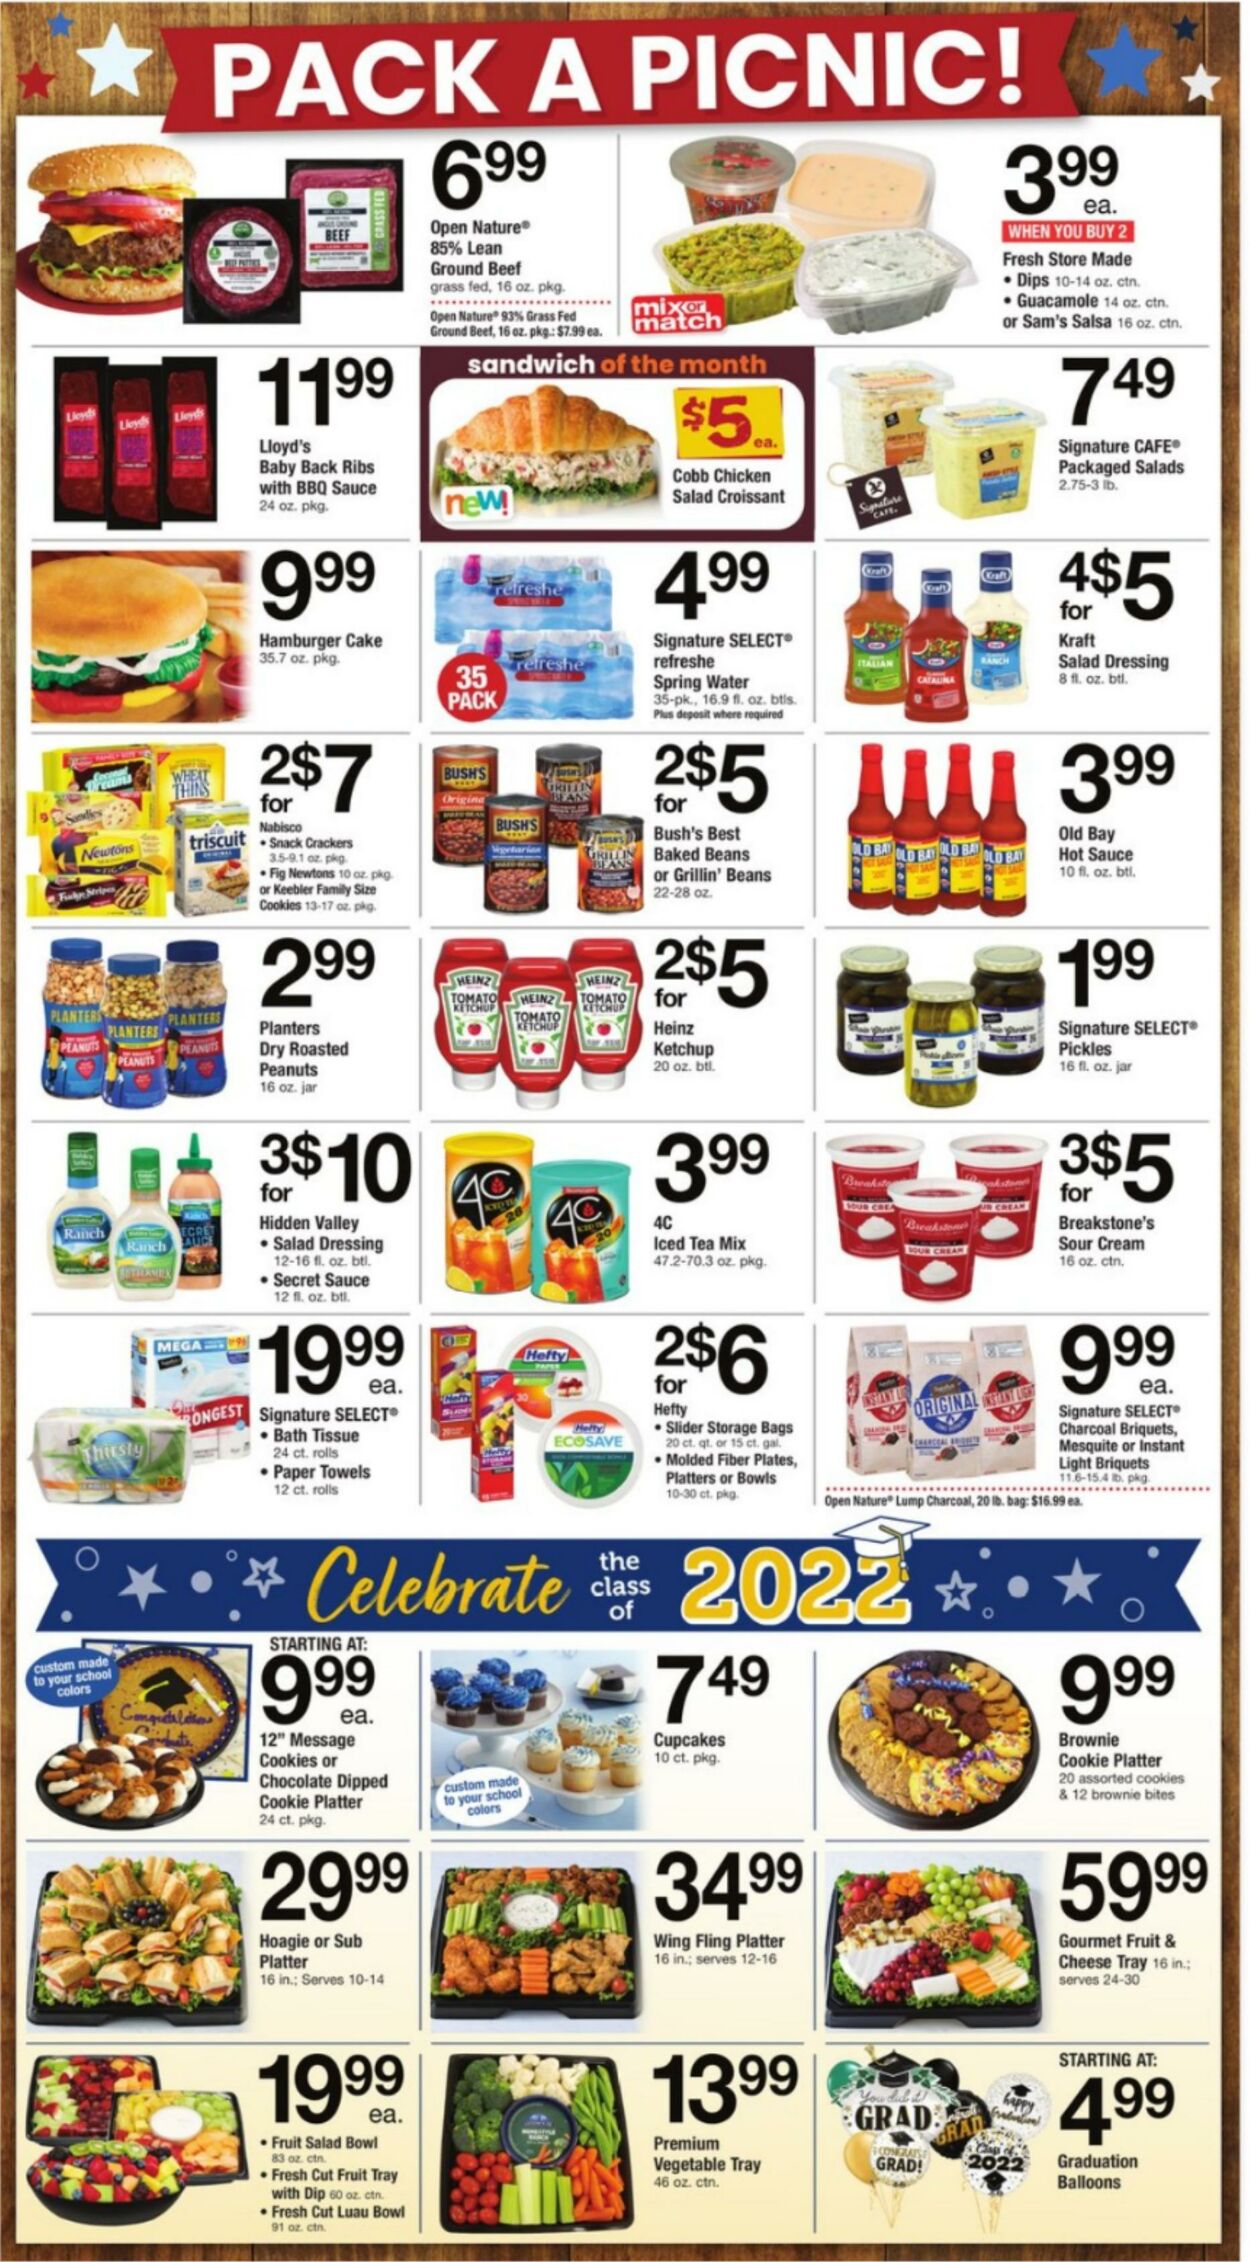 Weekly ad Acme 05/20/2022 - 05/26/2022